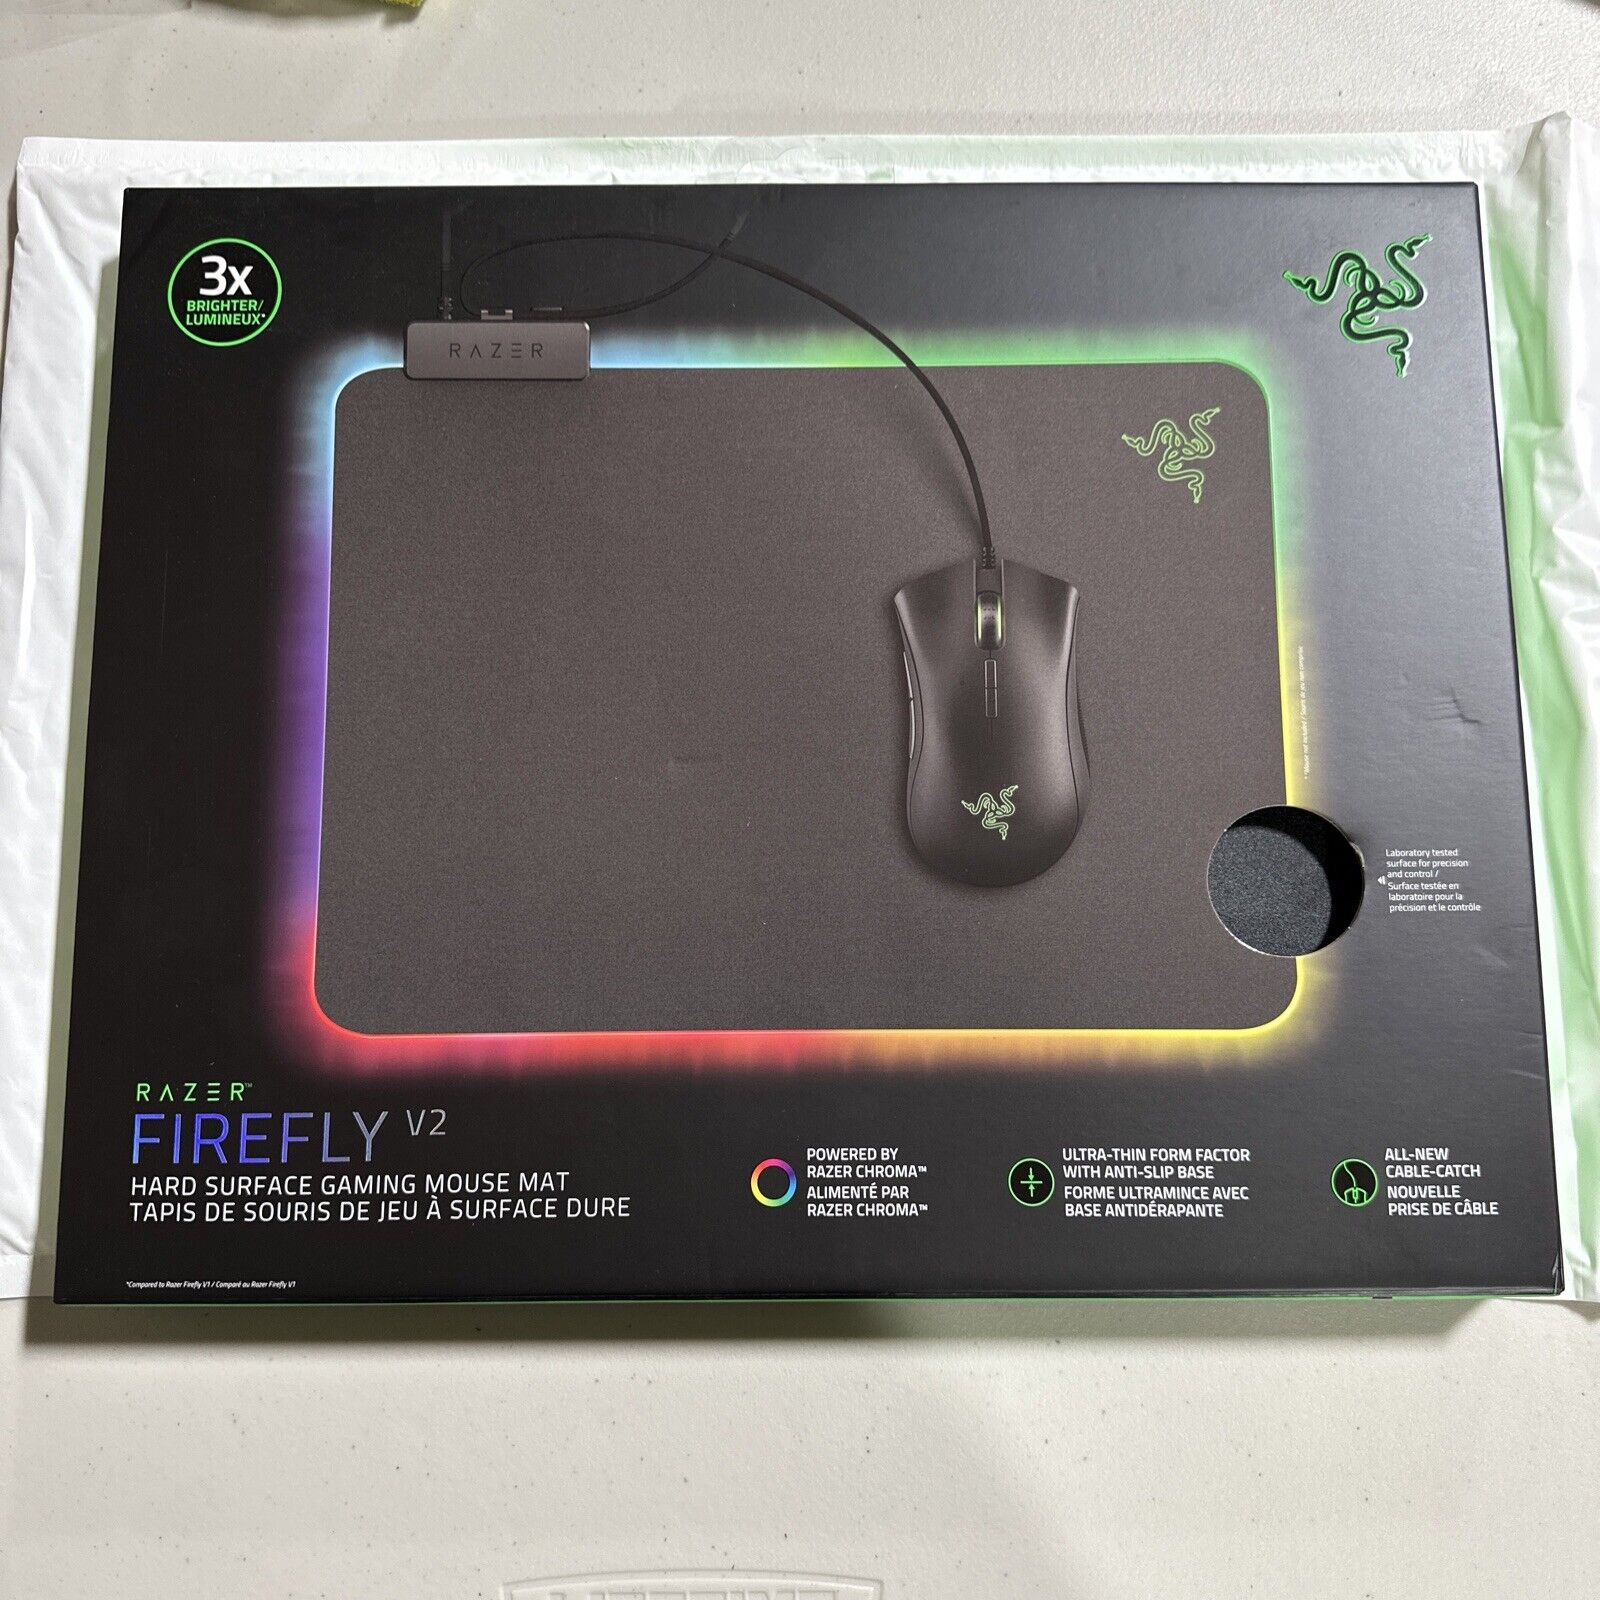 Razer Firefly V2 - Hard Surface Gaming Mouse Mat with Chroma - Brand New